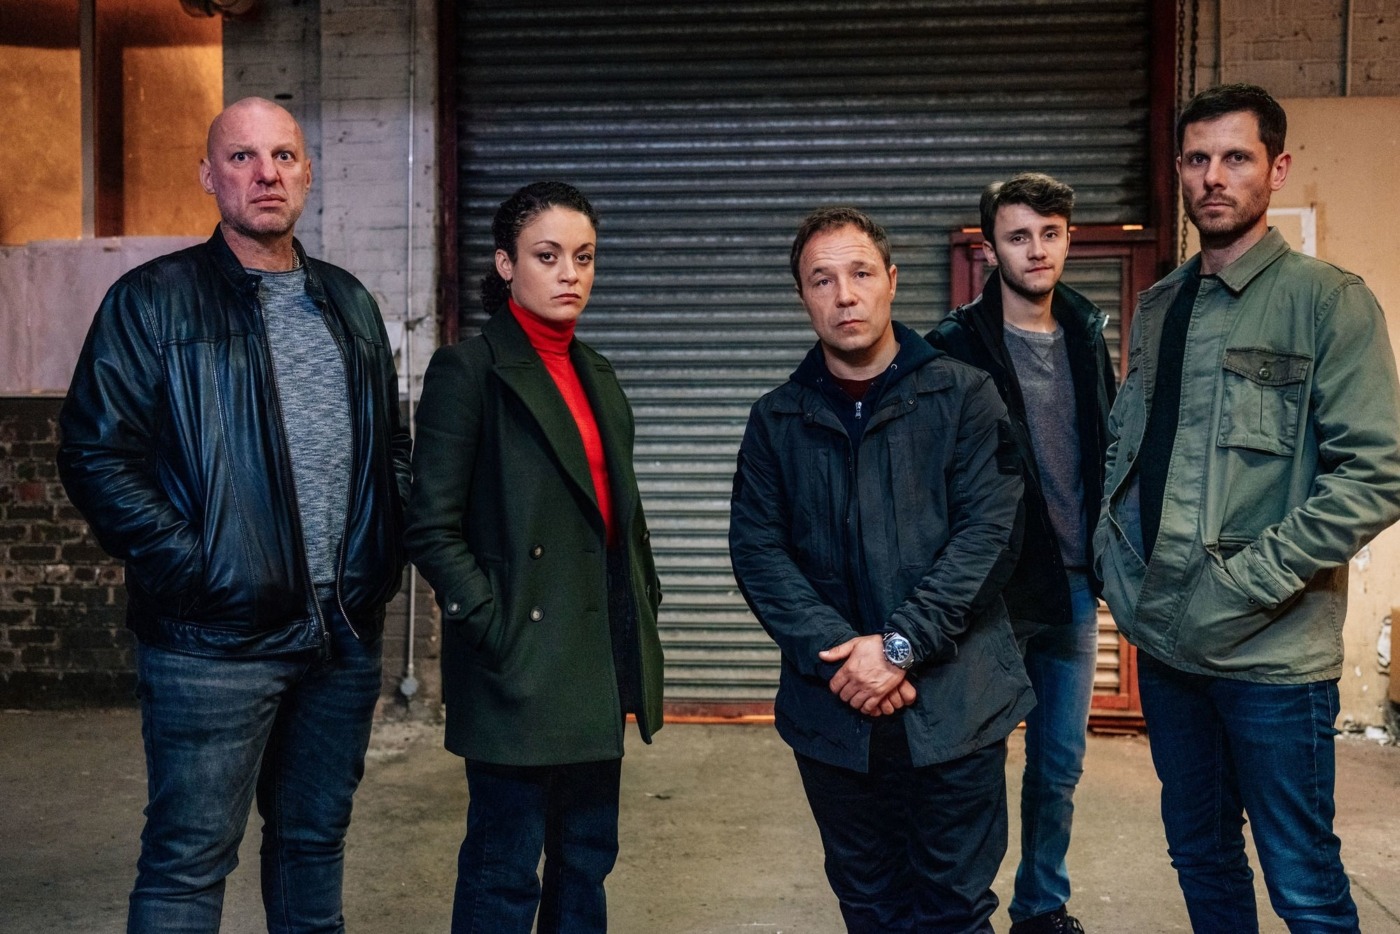 Line of Duty wastes no time getting started Series 5 Episode 1 Review